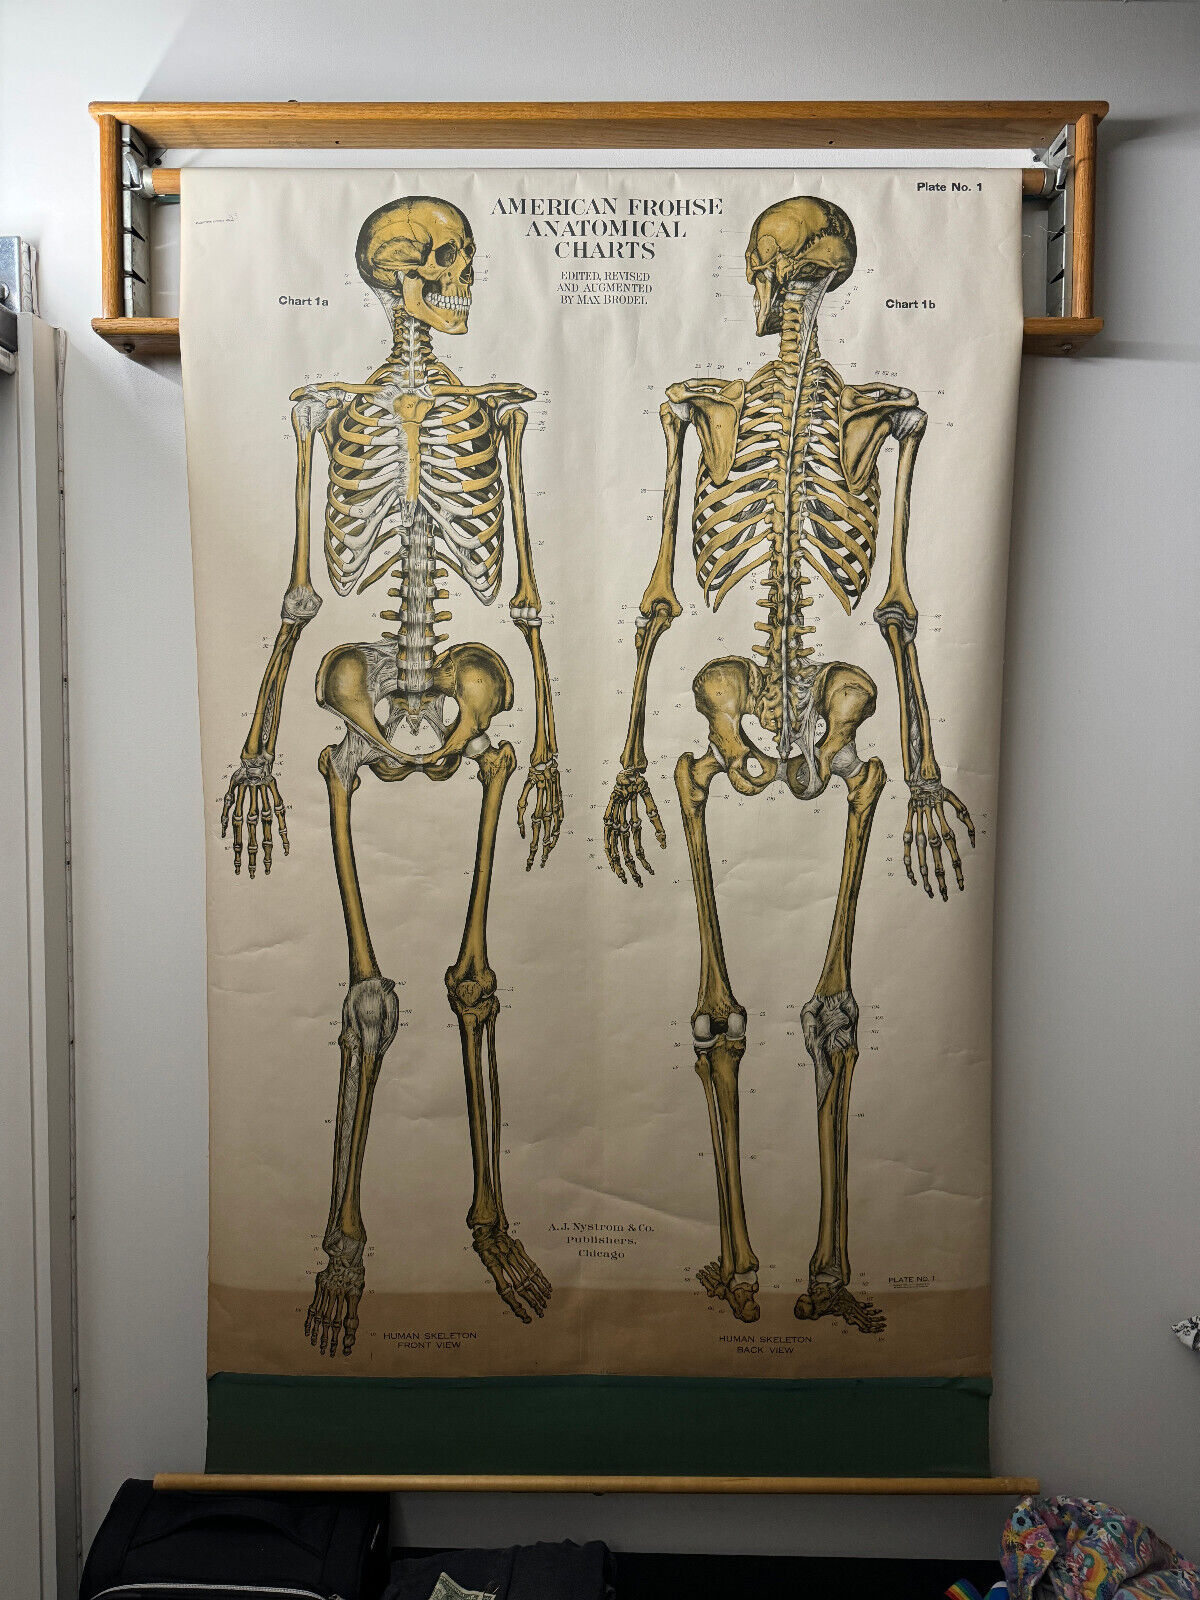 Antique 1918 Frohse Nystrom Anatomical Skeleton Pulldown Poster Display chart